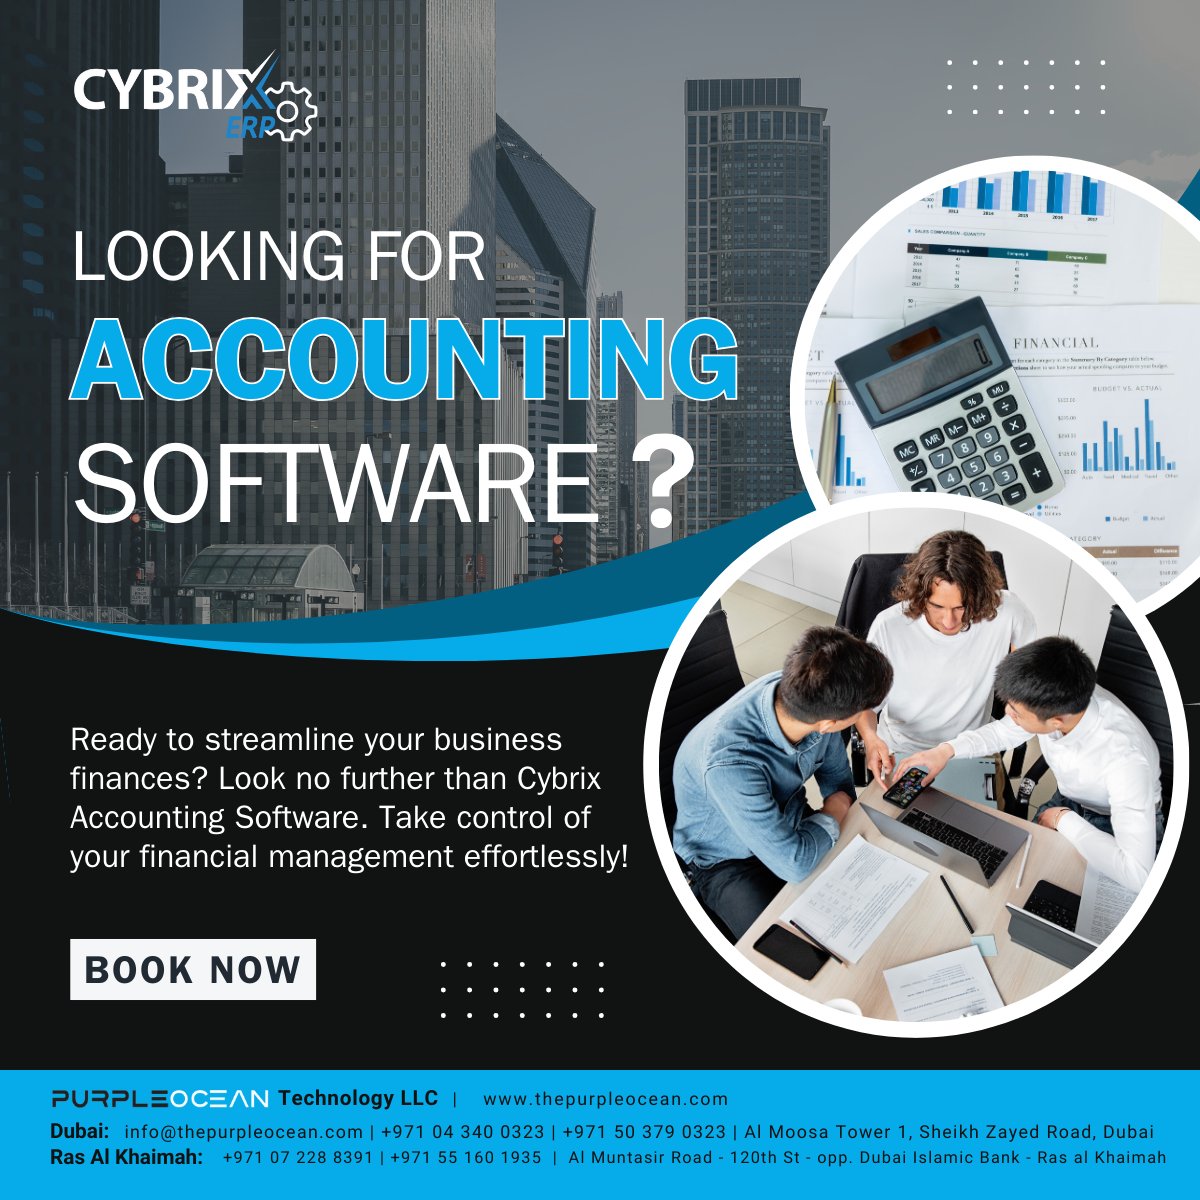 Ready to streamline your #business #finances? Look no further than #Cybrix #Accounting #Software. Take control of your #financial #management effortlessly! 

#purpleoceantechnology #software  #cybrixpos #cybrixerp #erpsystems #dubai #UAE #AbuDhabi #rasalkhaimah